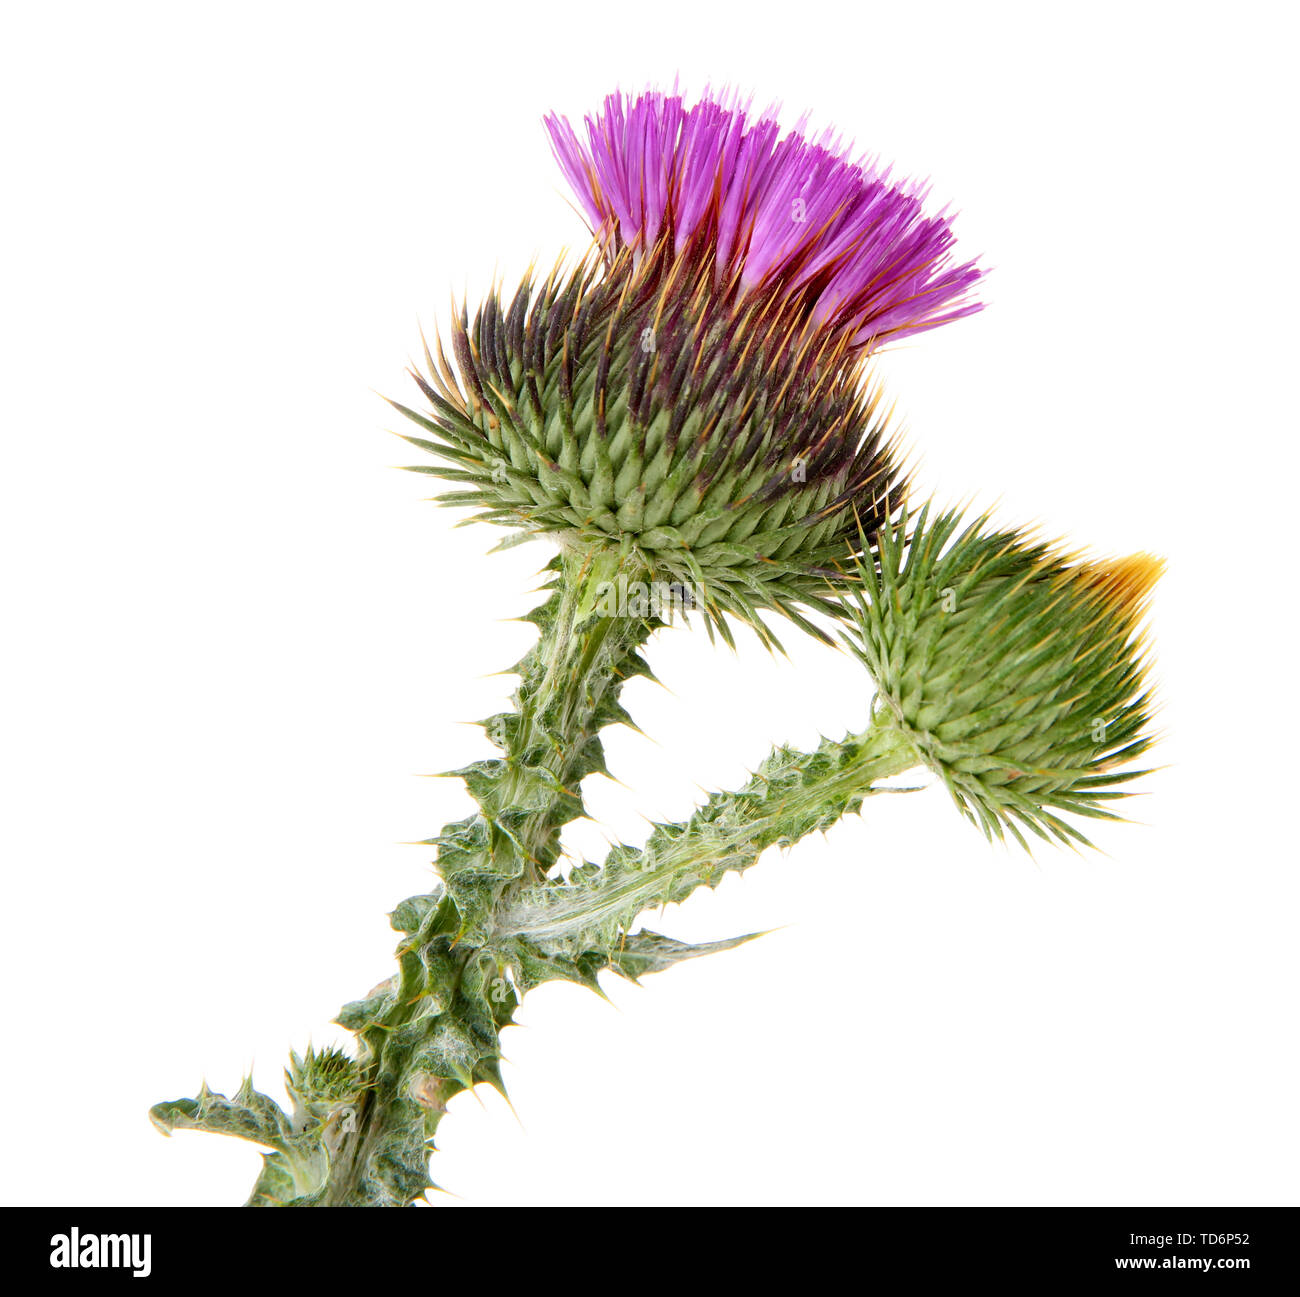 Thistle flower isolated on white Stock Photo